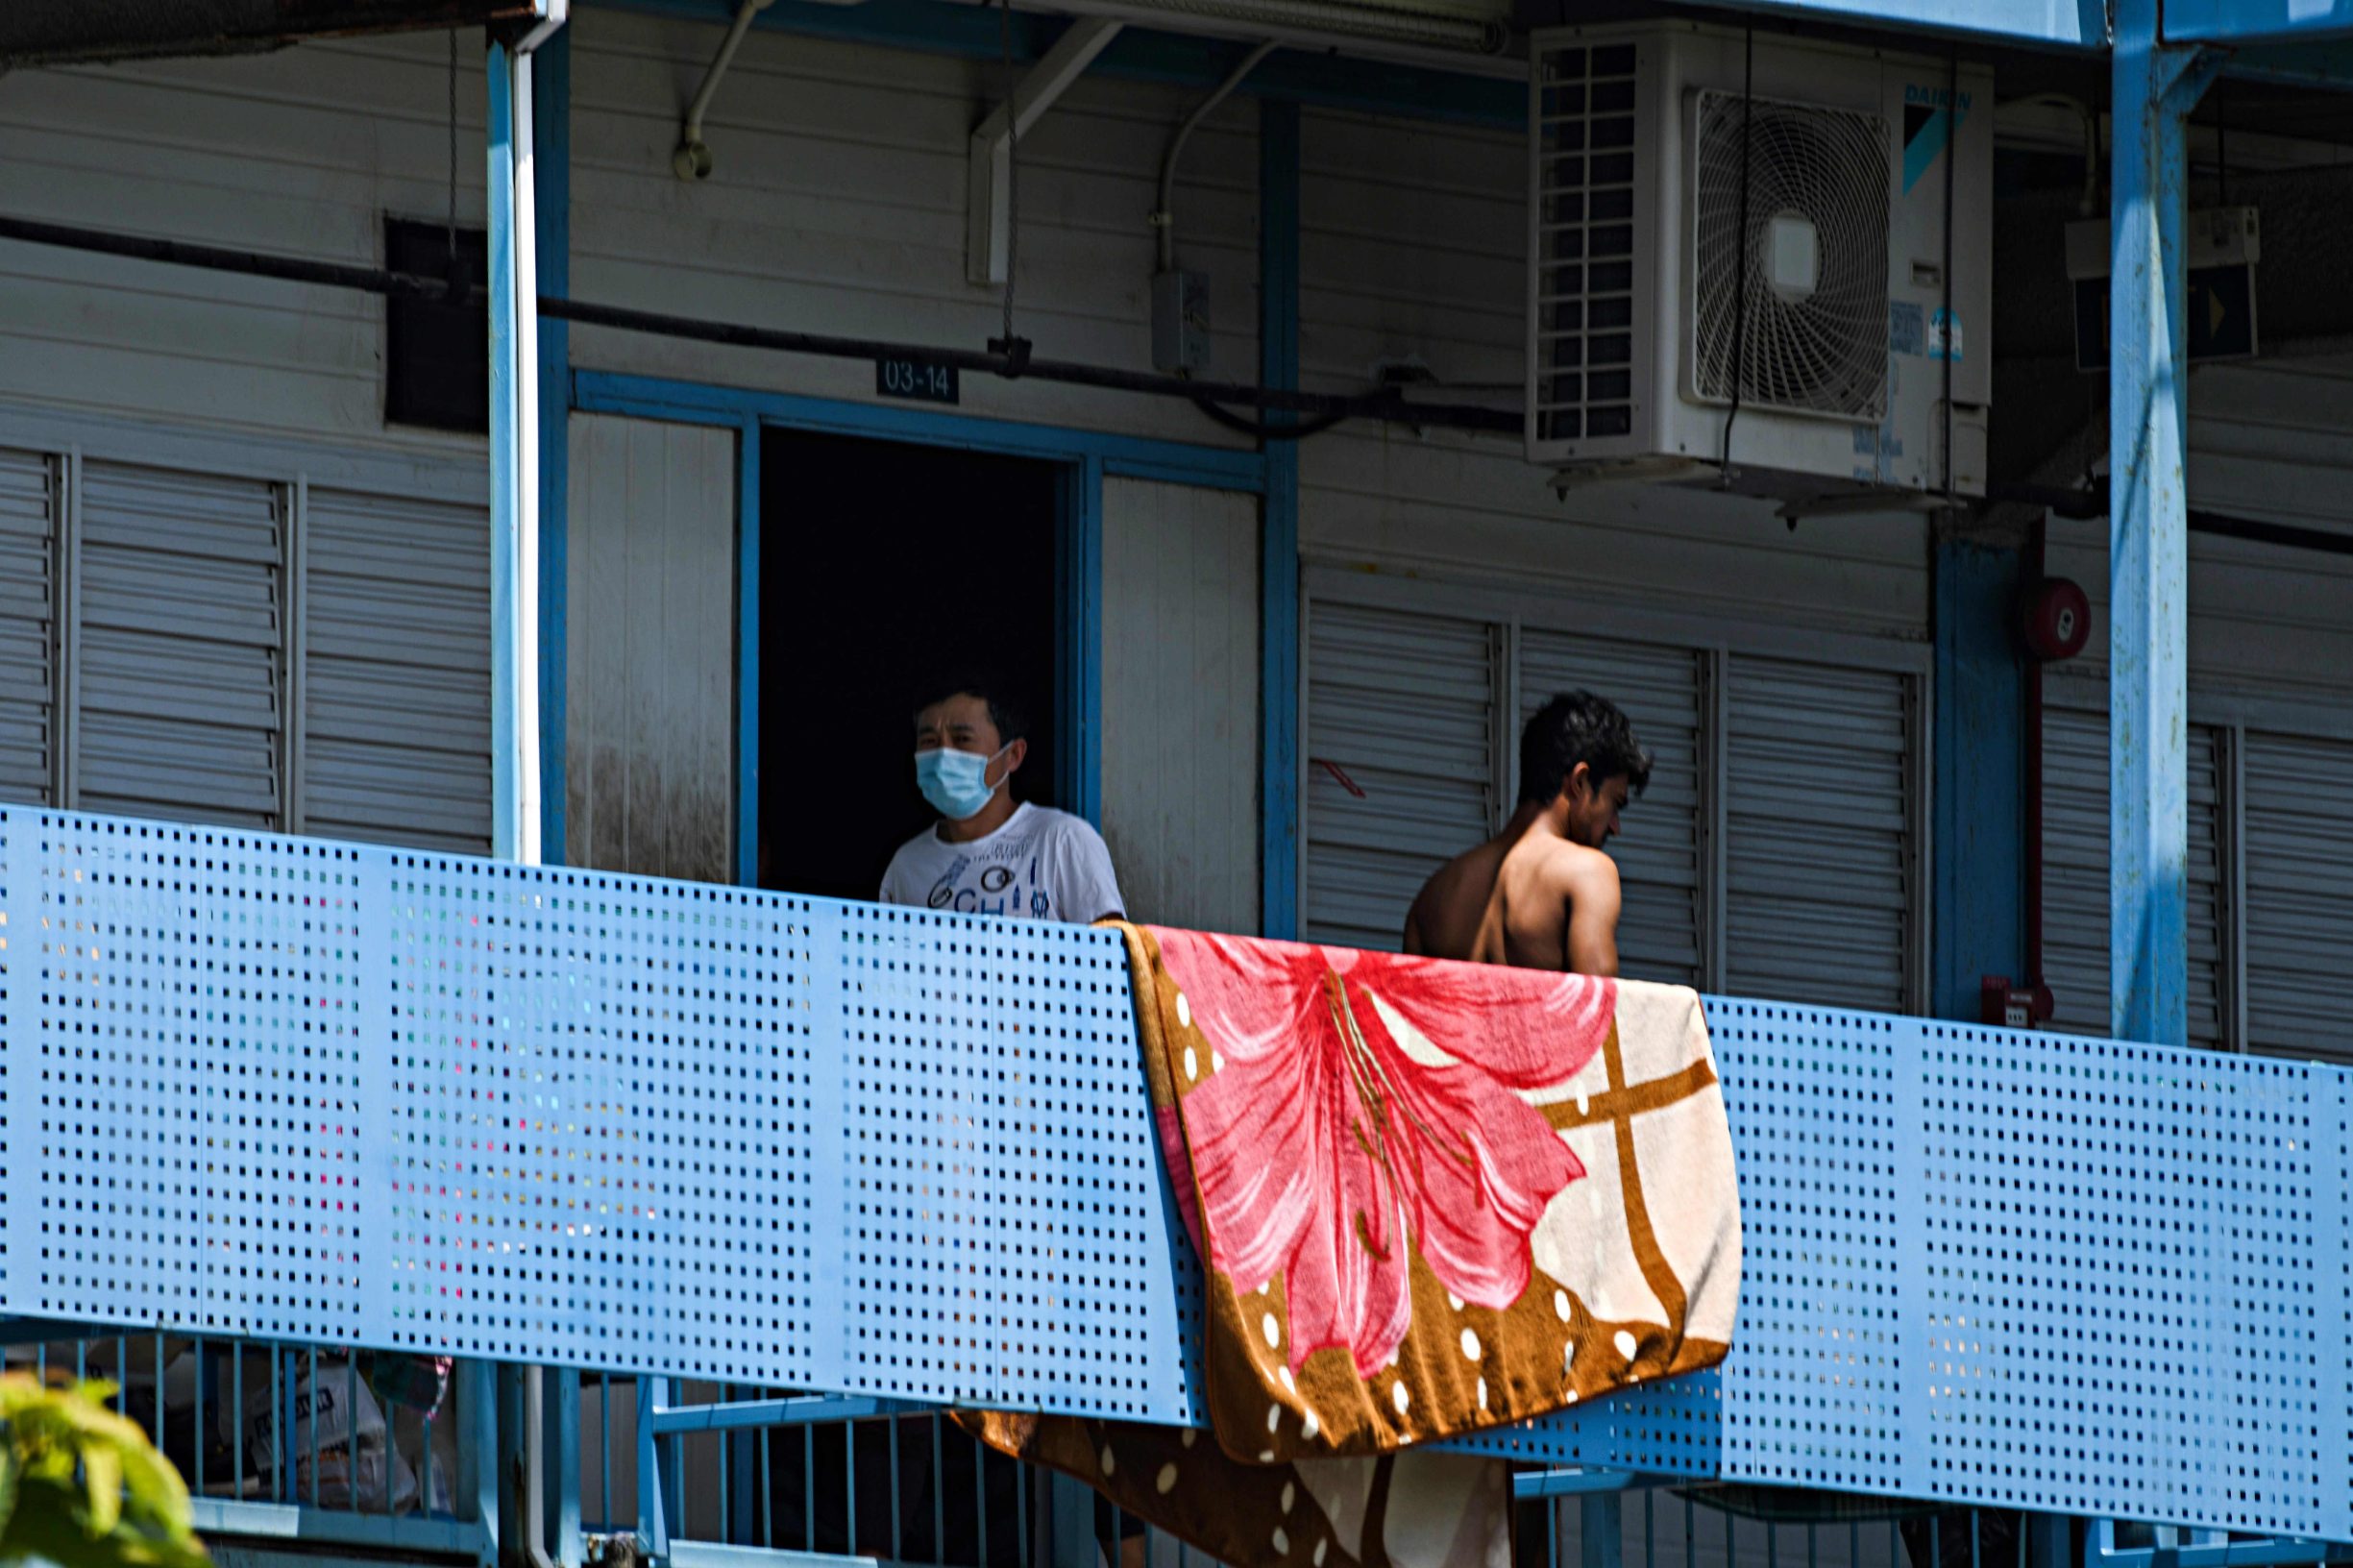 A man, wearing a face mask walks along corridor of Tuas South foreign workers dormitory that has been placed under government restriction as preventive measure against the spread of the COVID-19 coronavirus in Singapore on April 19, 2020. - Singapore imposed a mandatory stay-home order for migrant workers including in the construction sector for 14 days effective on April 20 due to coronavirus pandemic. (Photo by Roslan RAHMAN / AFP)